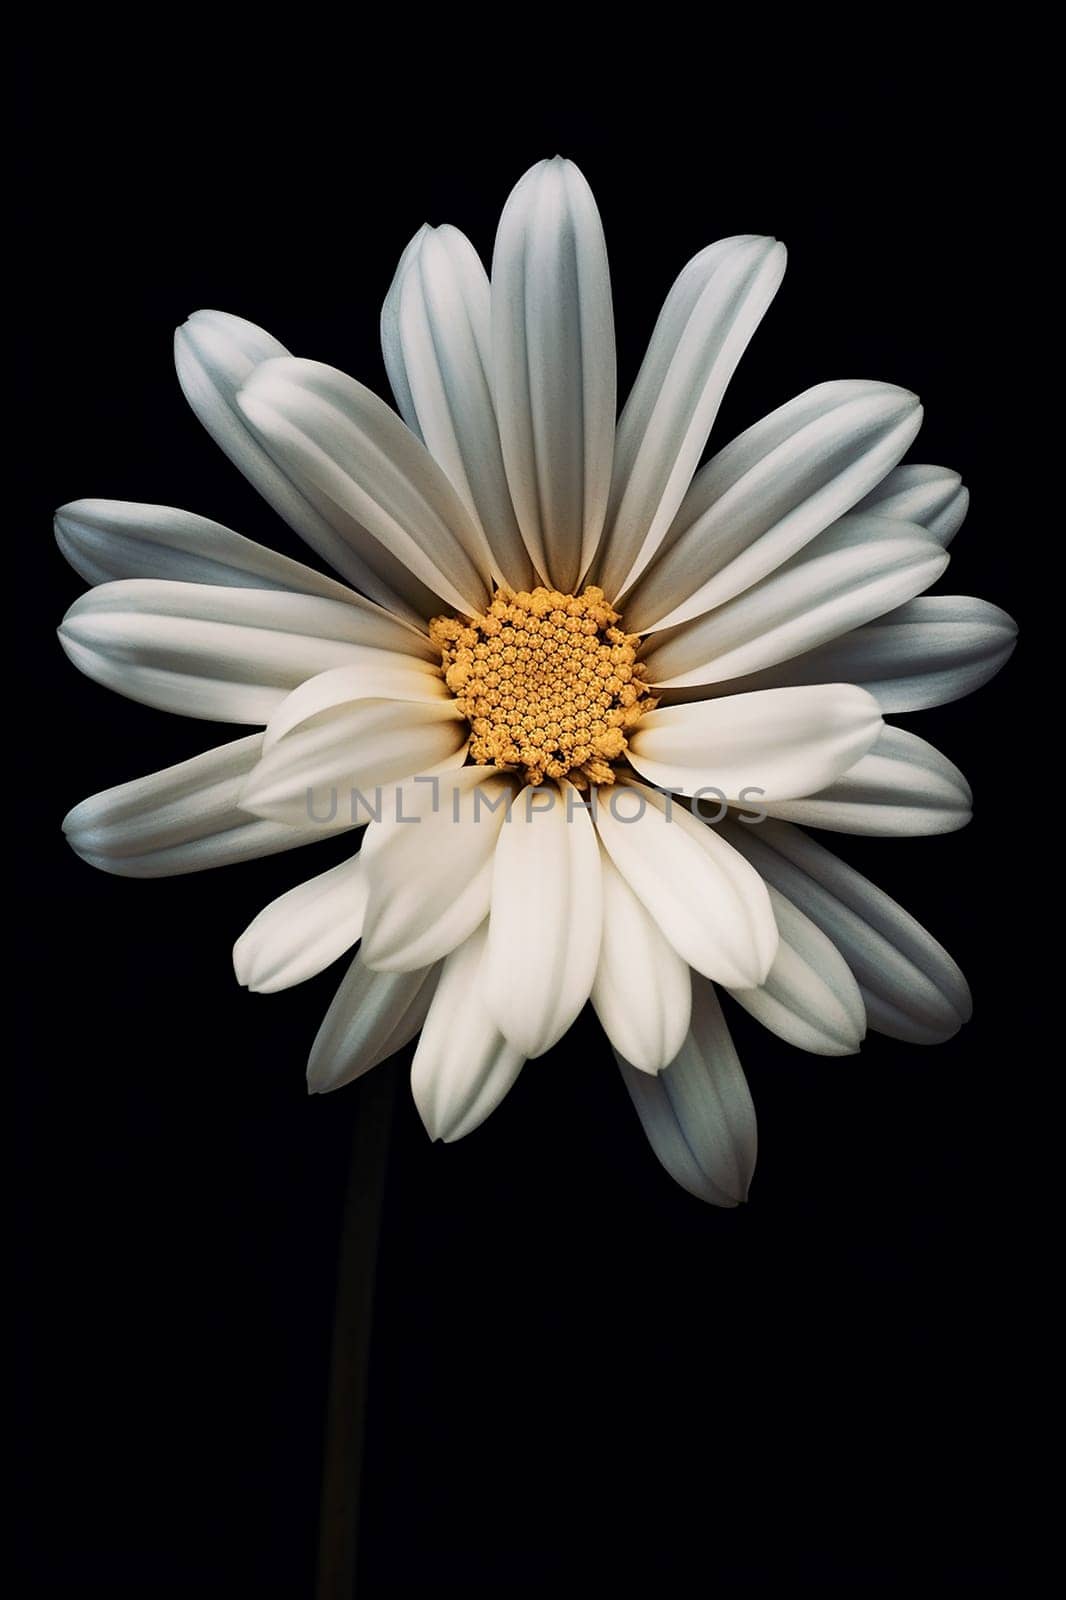 Close up of a white daisy against a black background, showcasing its delicate petals. by Hype2art